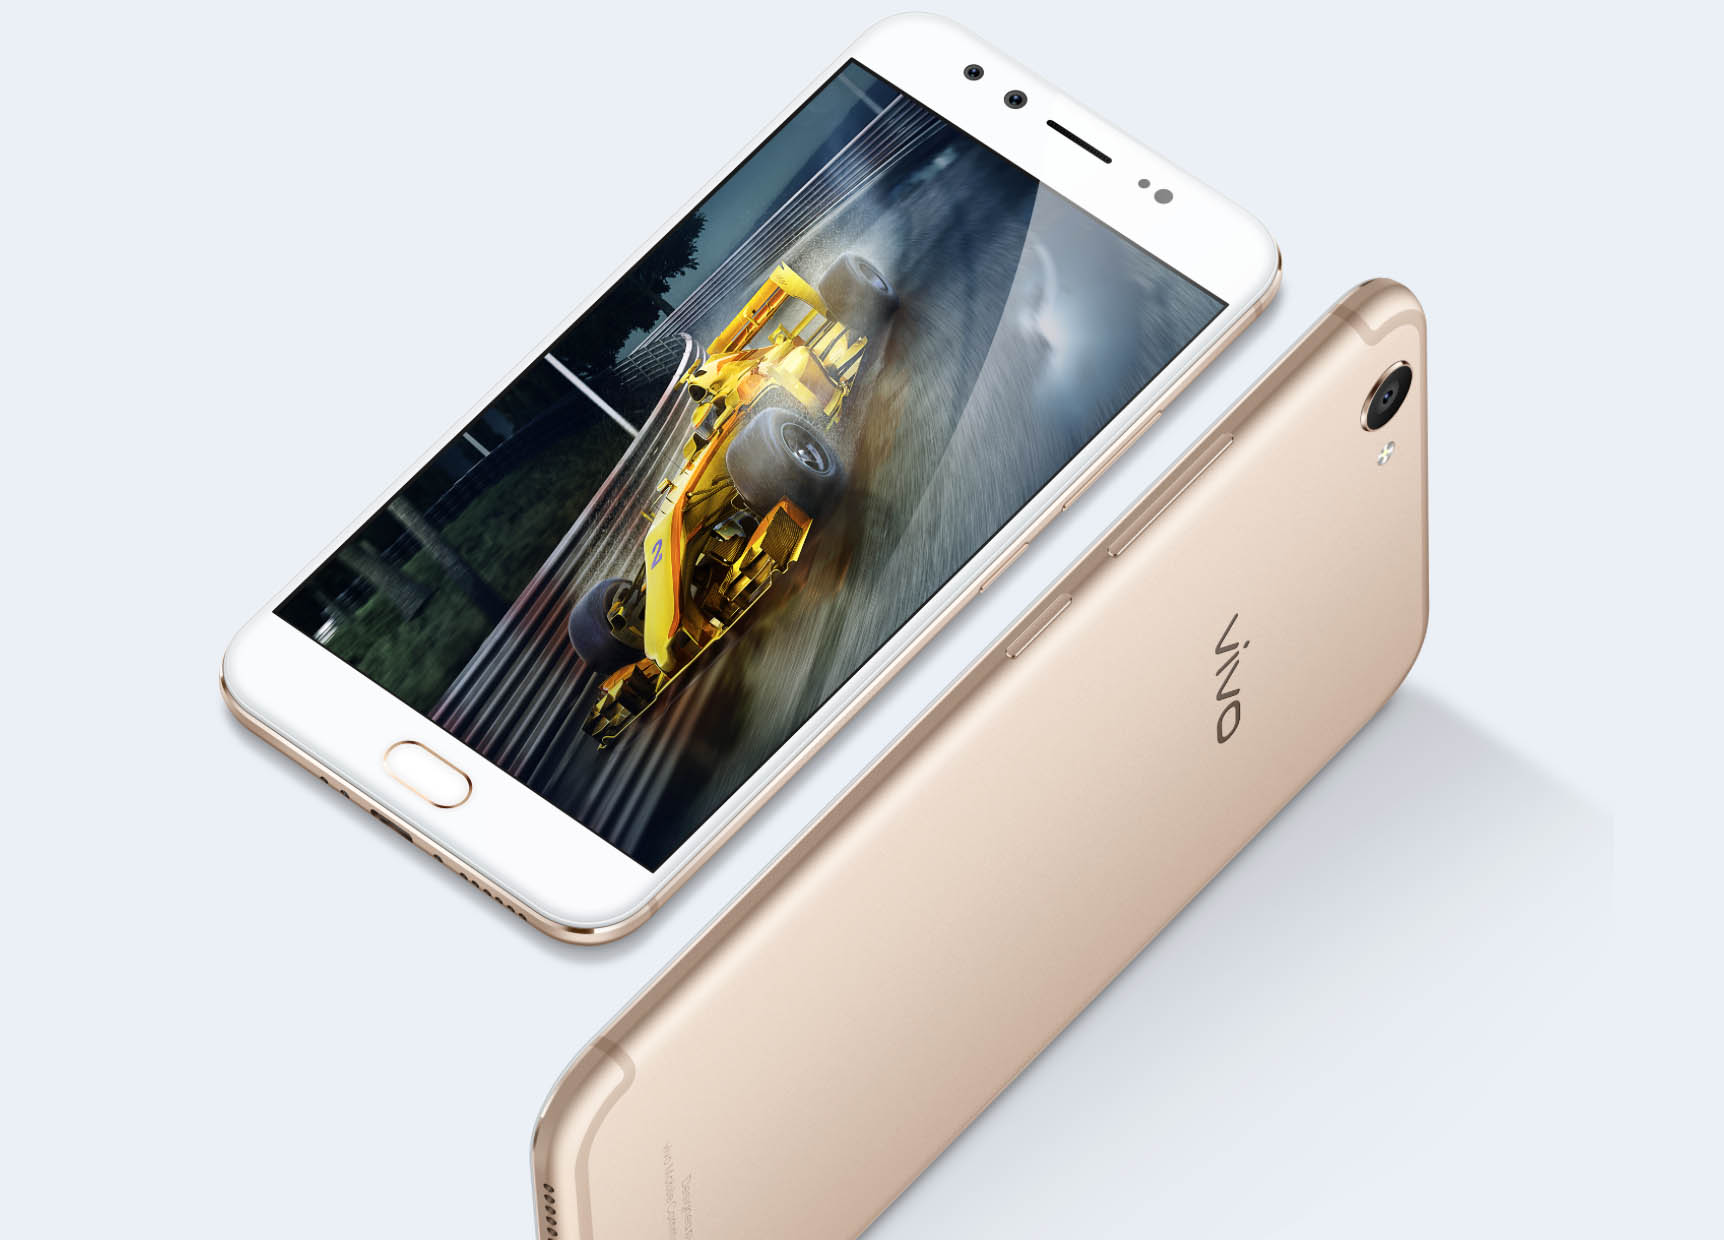 Vivo V5 Plus the world’s first 20MP dual front camera now available in the Philippines